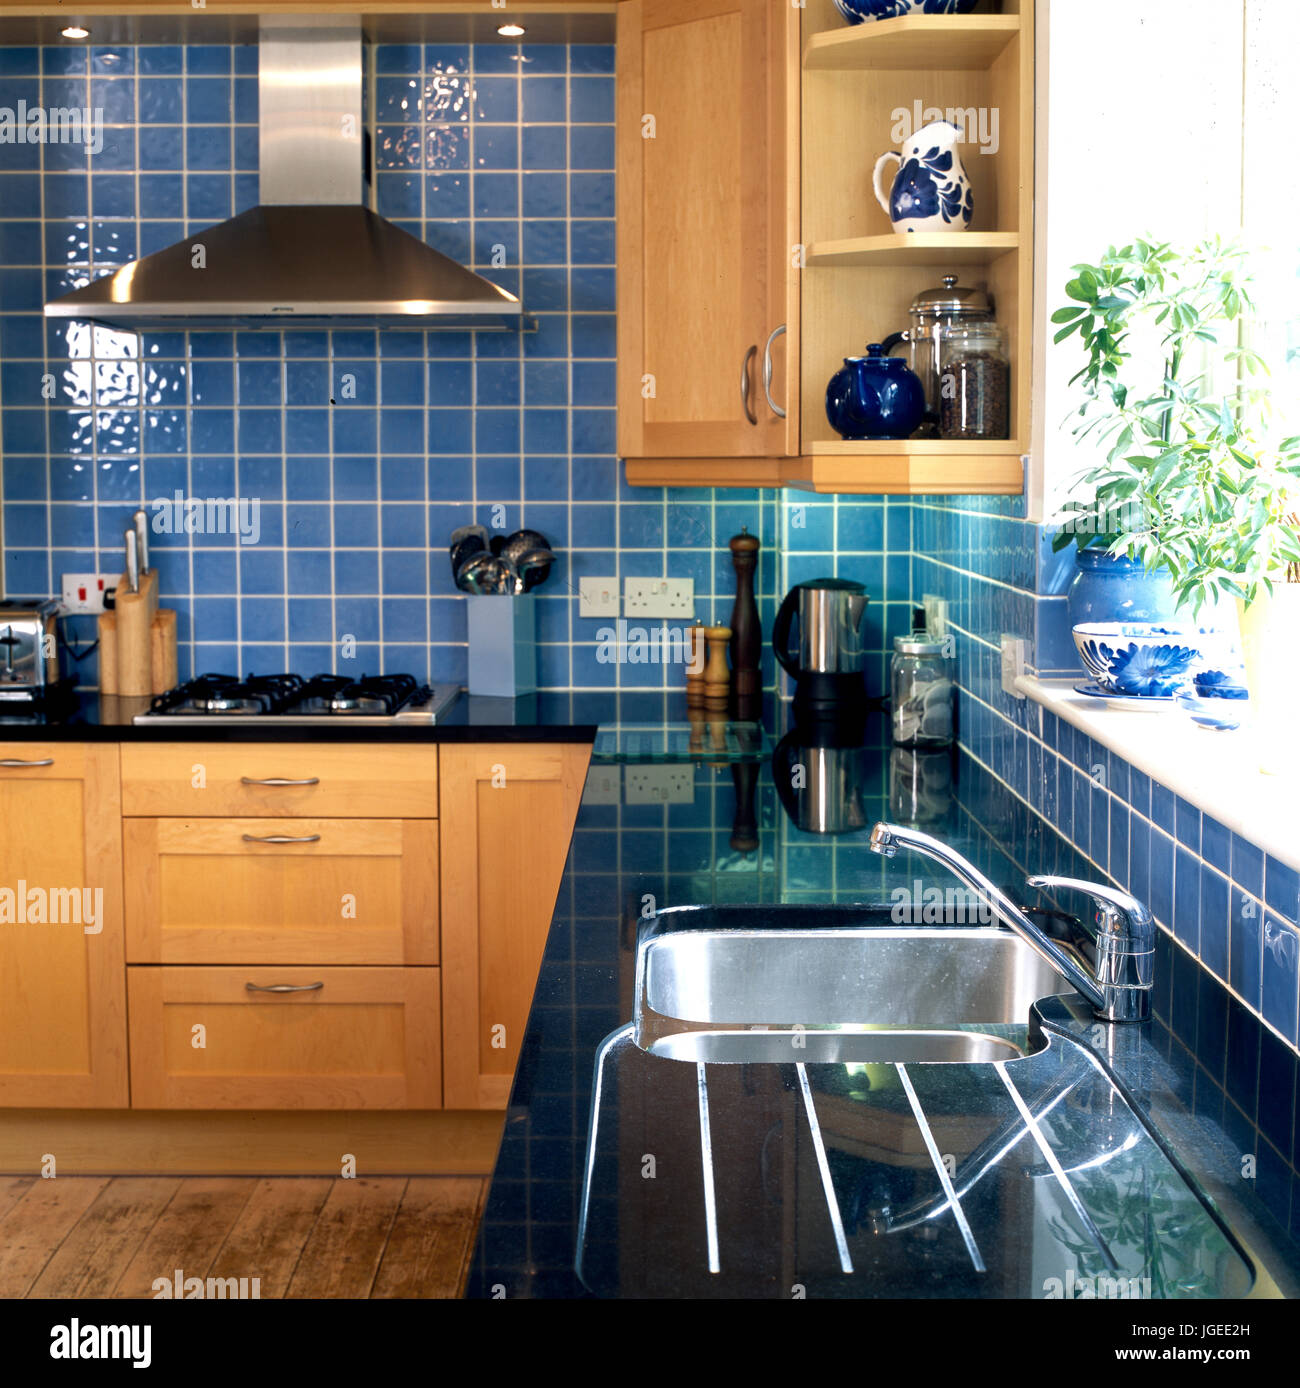 Blue Tiled Kitchen With Black Counter Top Stock Photo 147835817